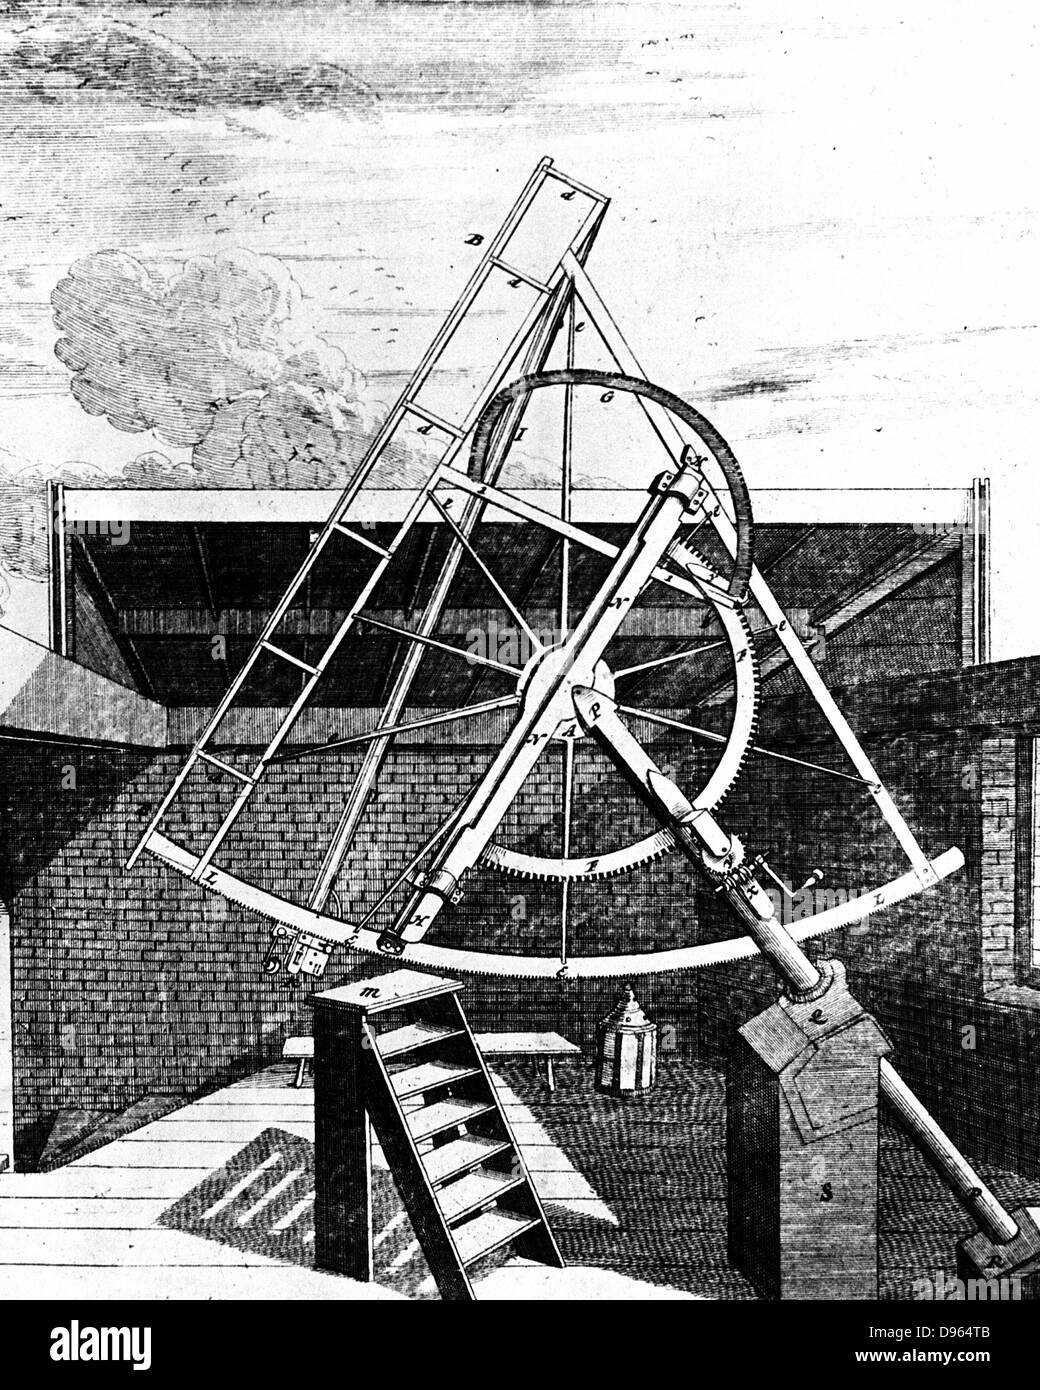 Flamsteed's equatorially mounted sextant fitted with telescope. Side showing gearing for aligning sextant. Flamsteed was the first Astronomer Royal. From 'Historia Coelestis Britannica'  John Flamsteed (London 1725). Engraving. Stock Photo